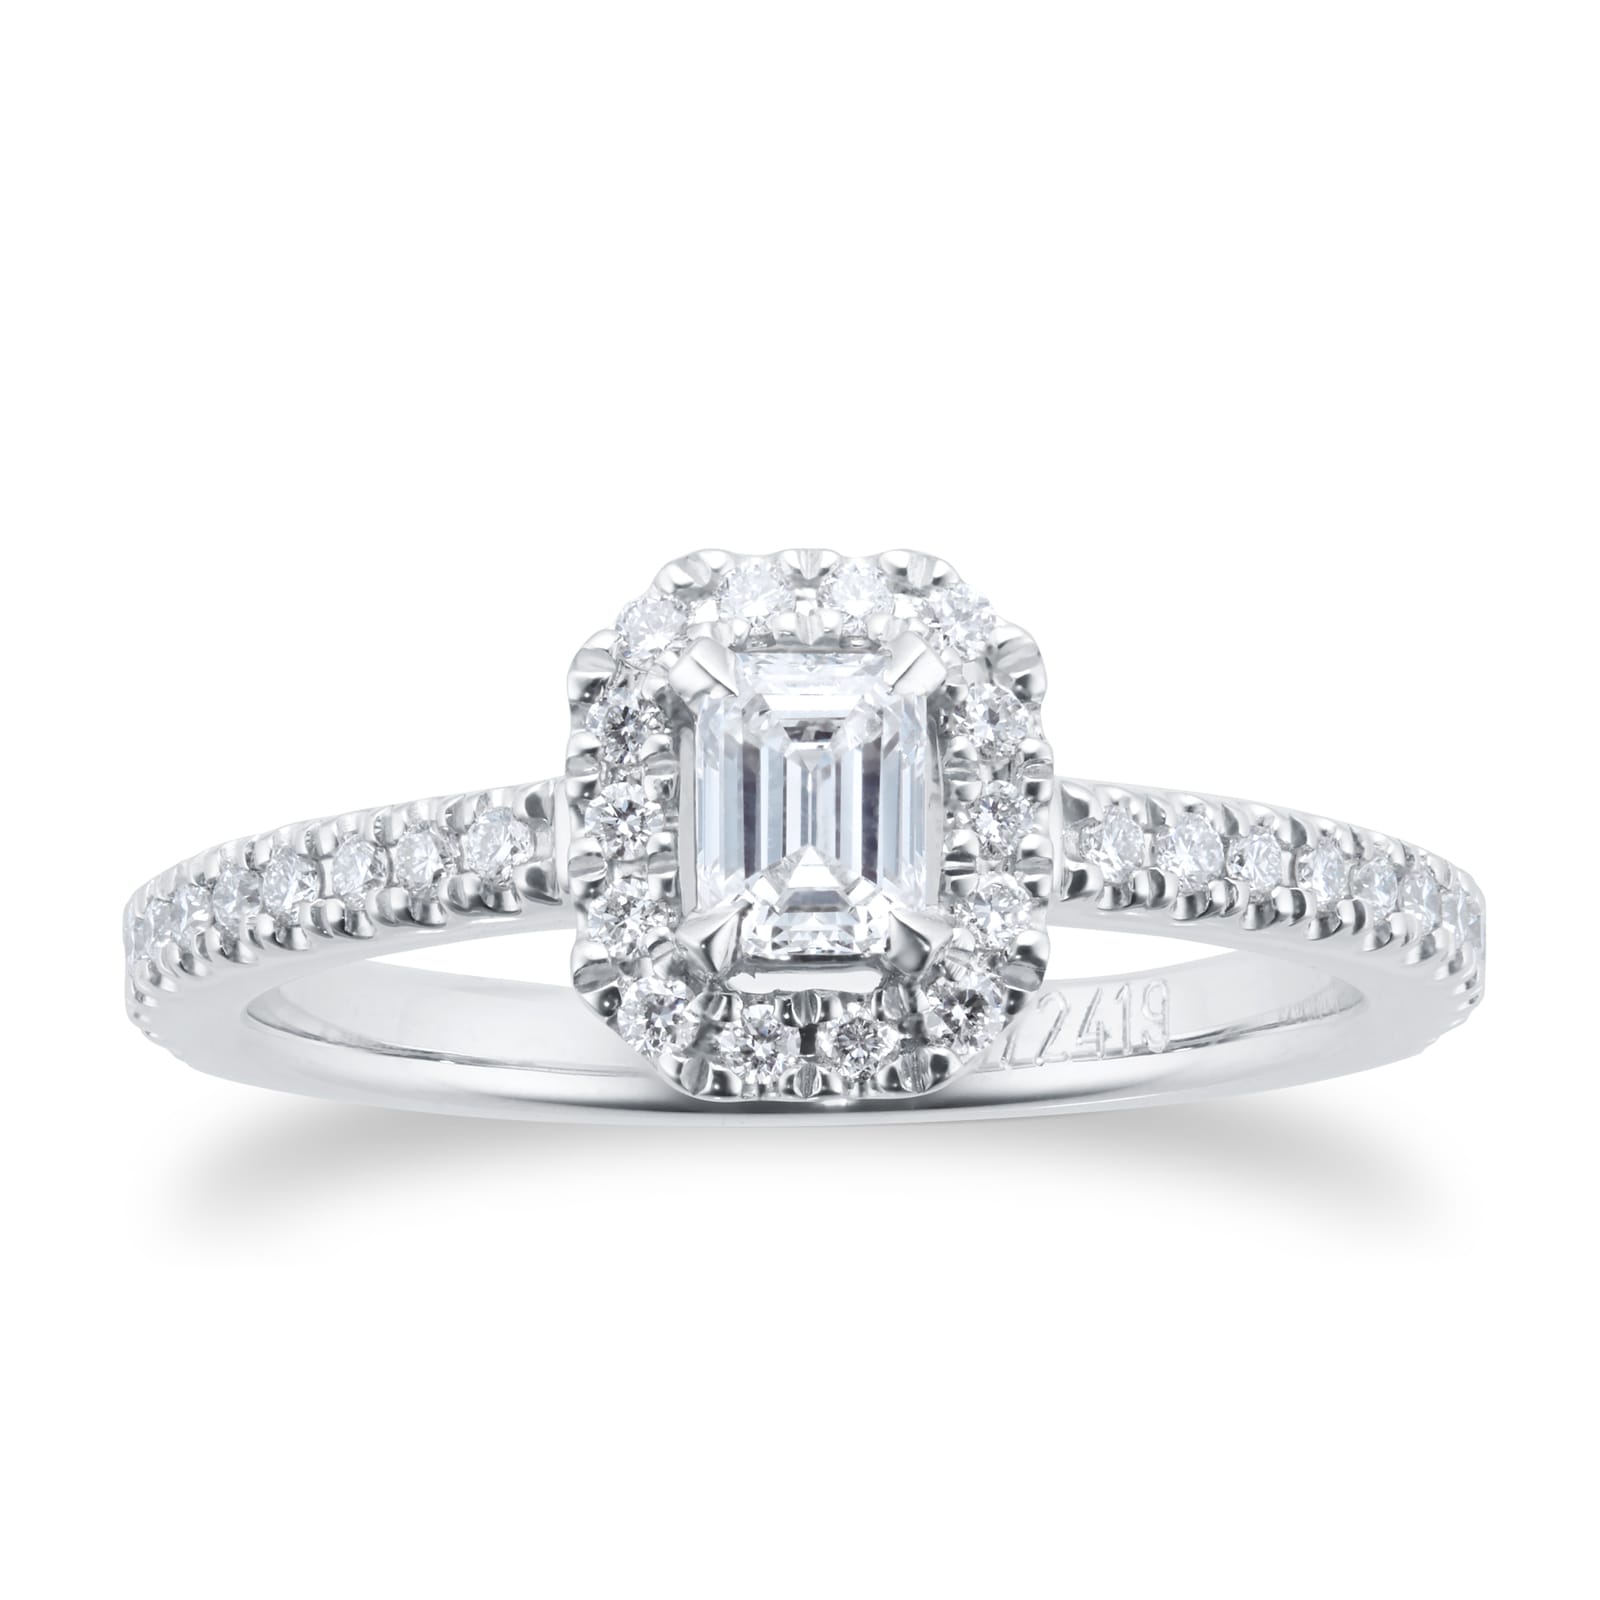 Amelia Engagement Ring With Diamond Band 0.50 Carat Total Weight - Ring Size J